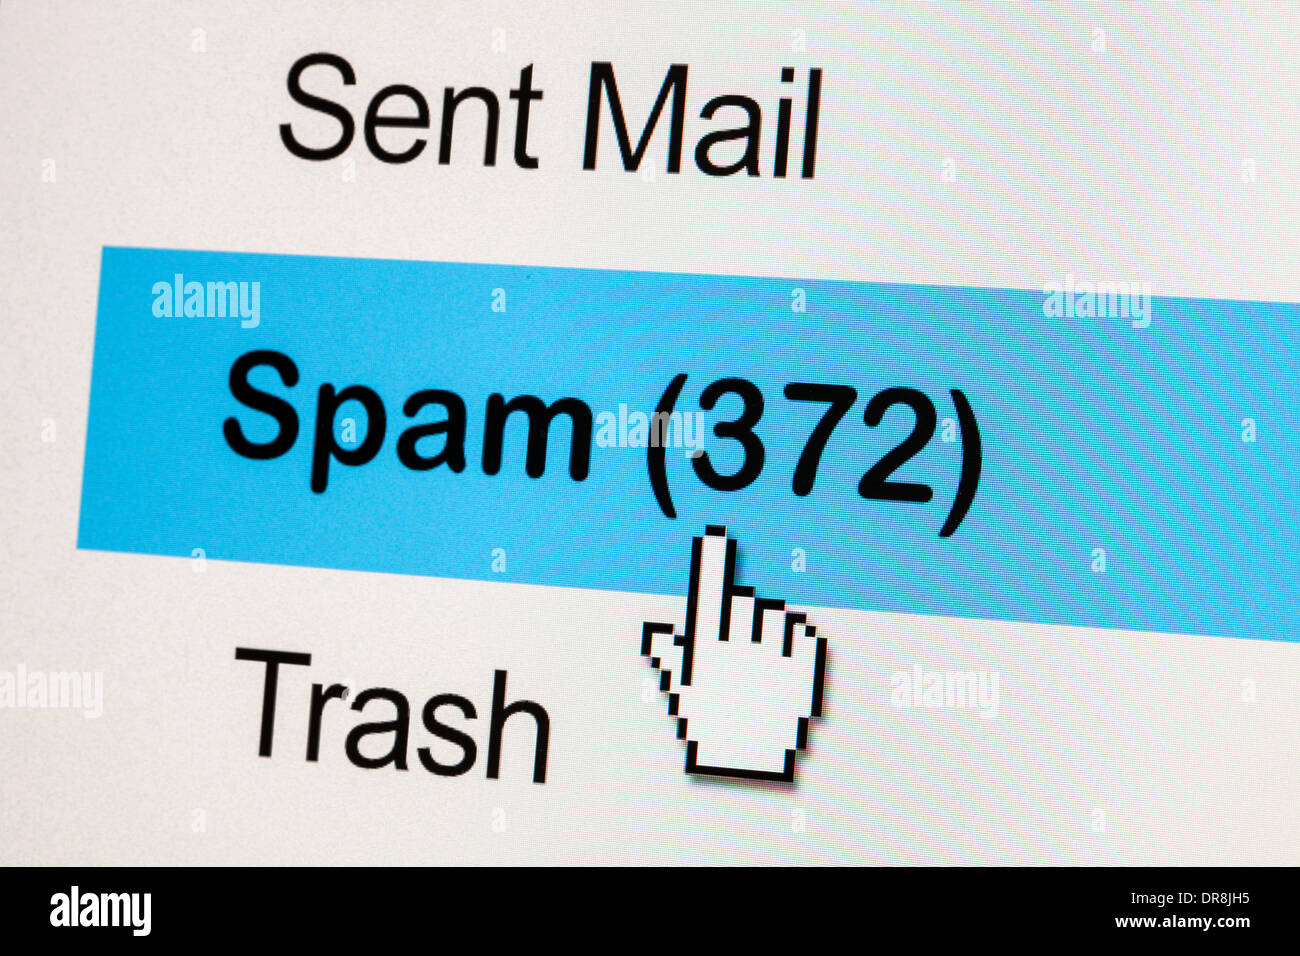 Spam Mailbox: Over 3,061 Royalty-Free Licensable Stock Photos